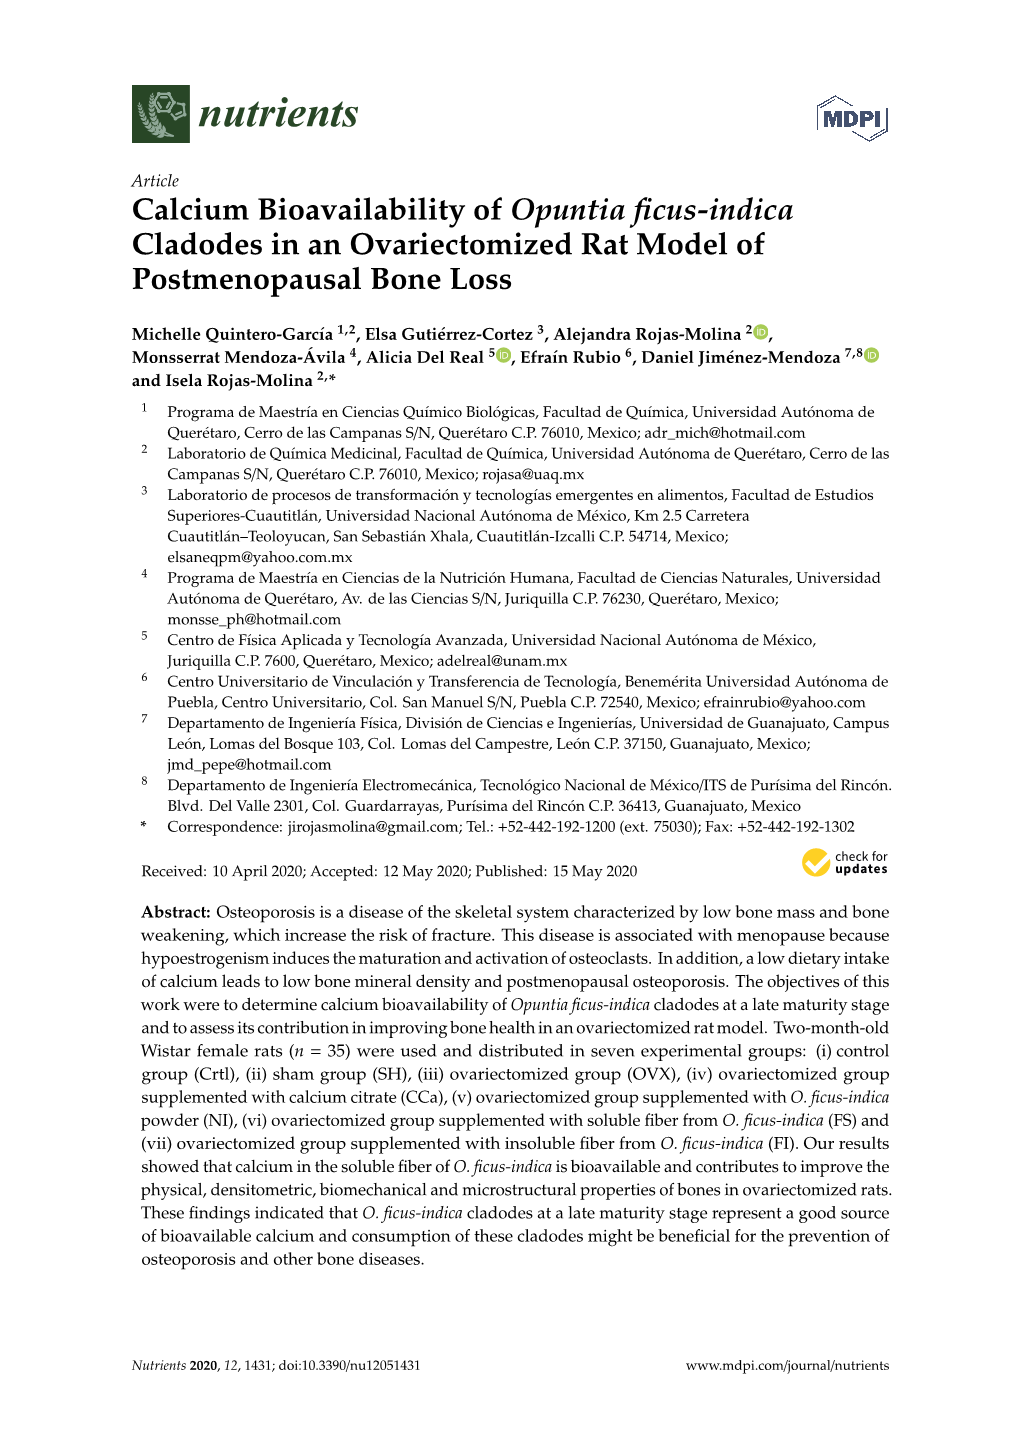 Calcium Bioavailability of Opuntia Ficus-Indica Cladodes in An